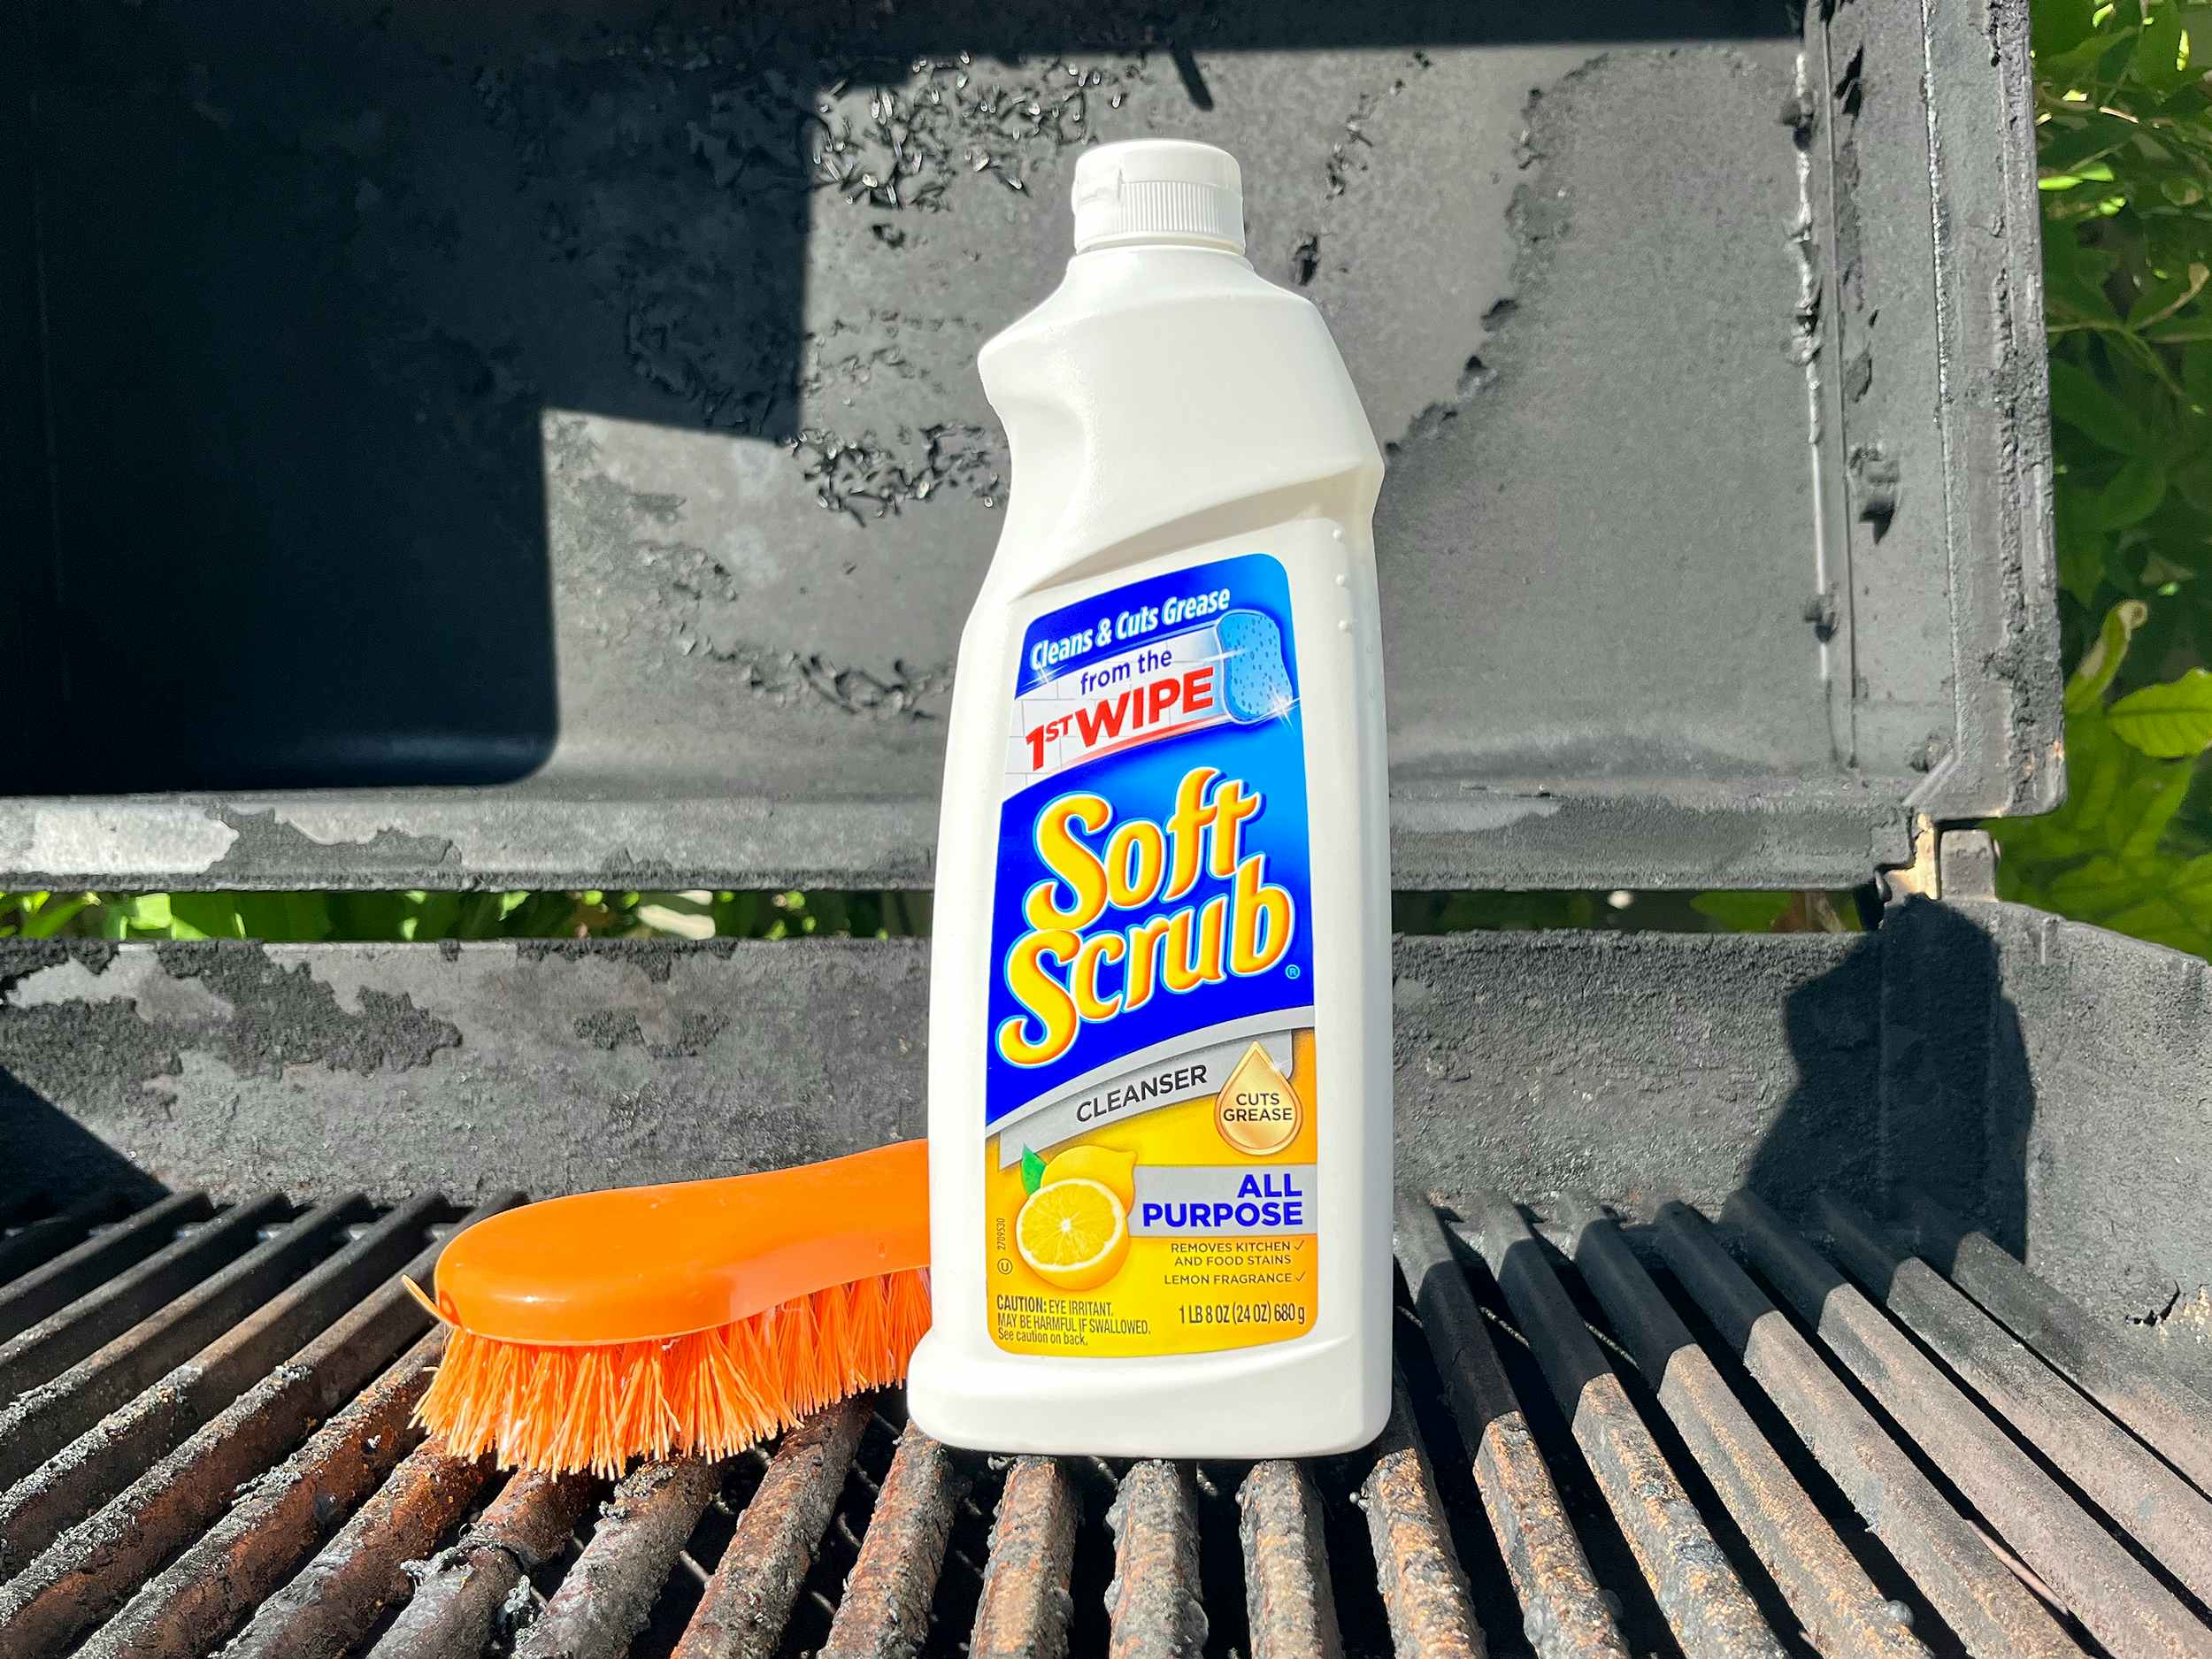 soft scrub all purpose cleanser and scrub brush on charcoal grill